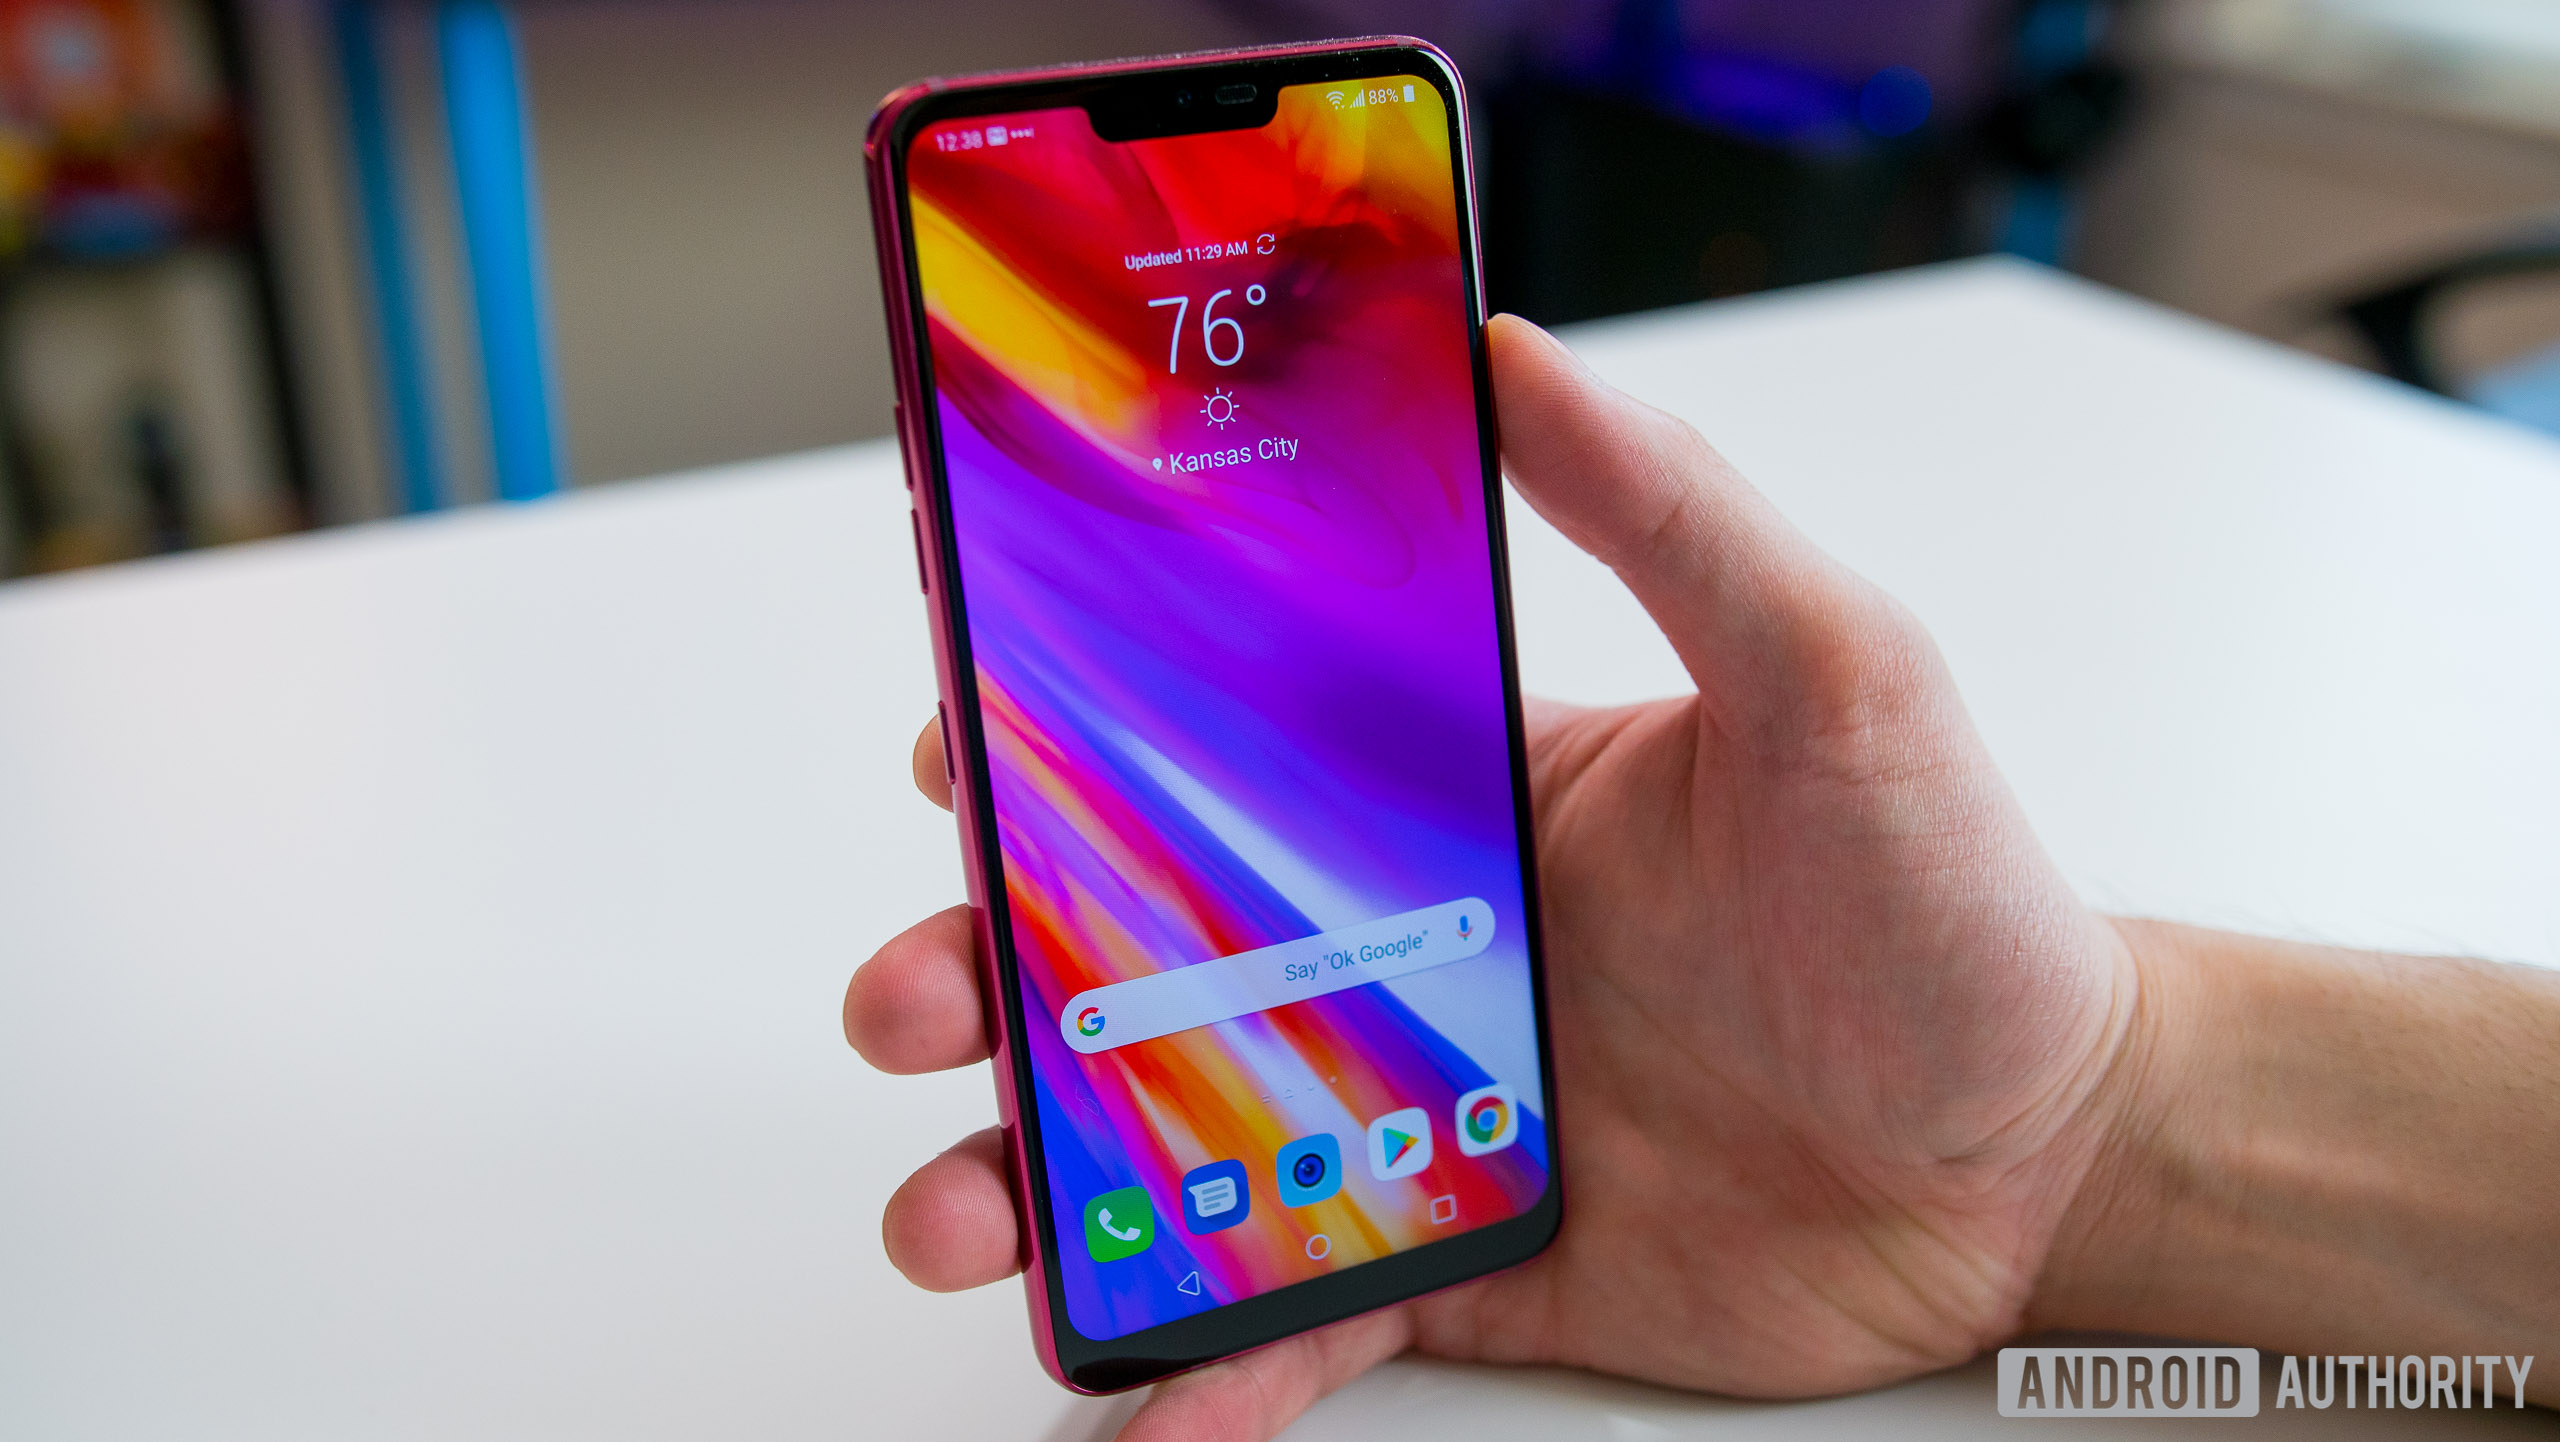 LG G7 ThinQ home screen held in hand